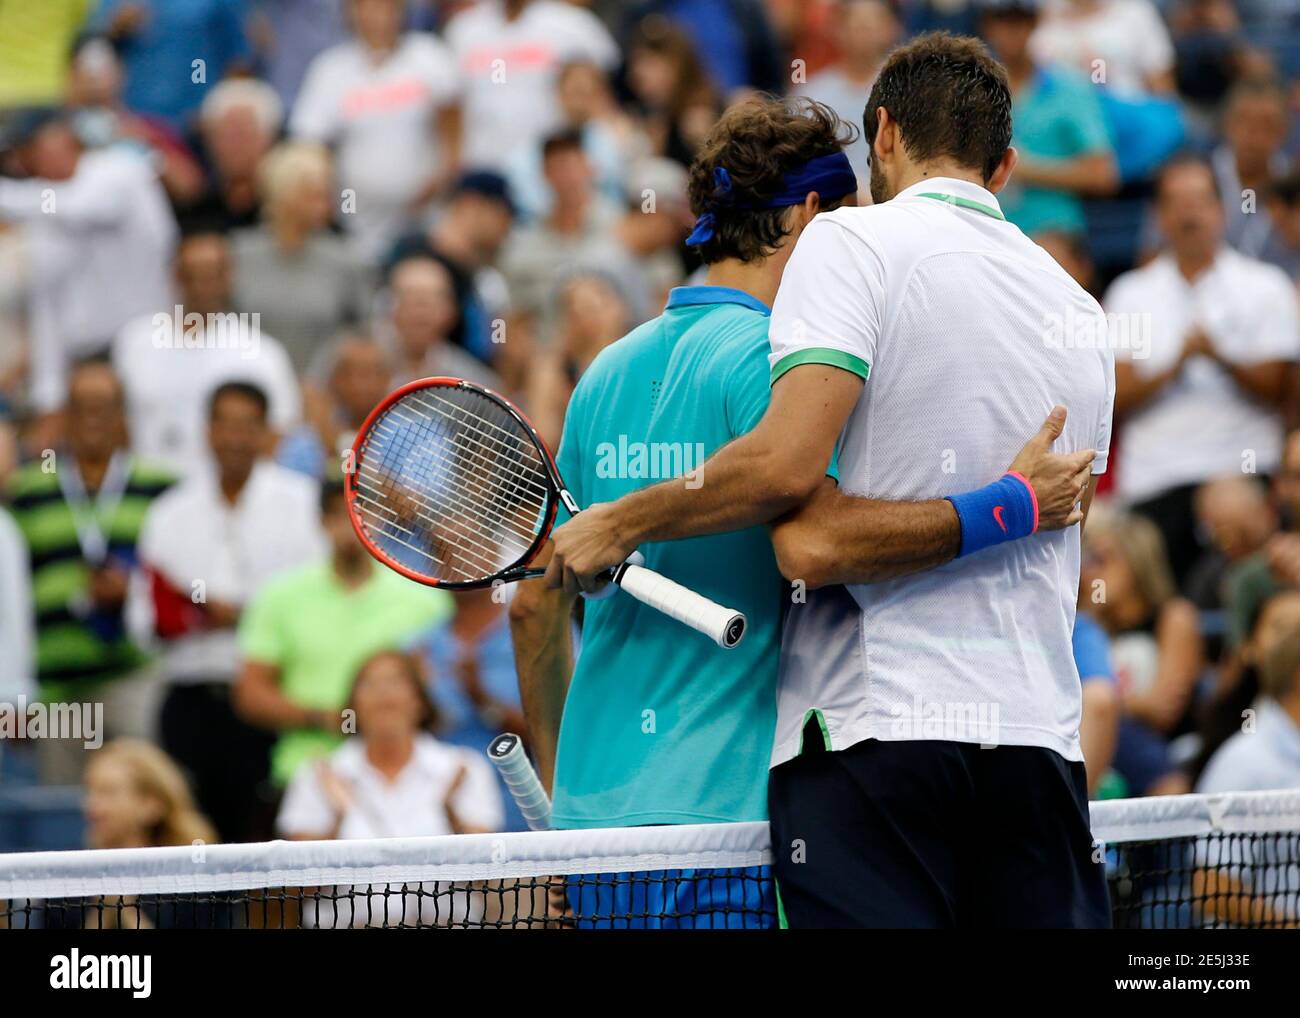 Marin Cilic of Croatia (R) and Roger Federer of Switzerland embrace after Cilic their semi-final match at the 2014 U.S. Open tennis tournament in New York, September 6, 2014. REUTERS/Mike Segar (